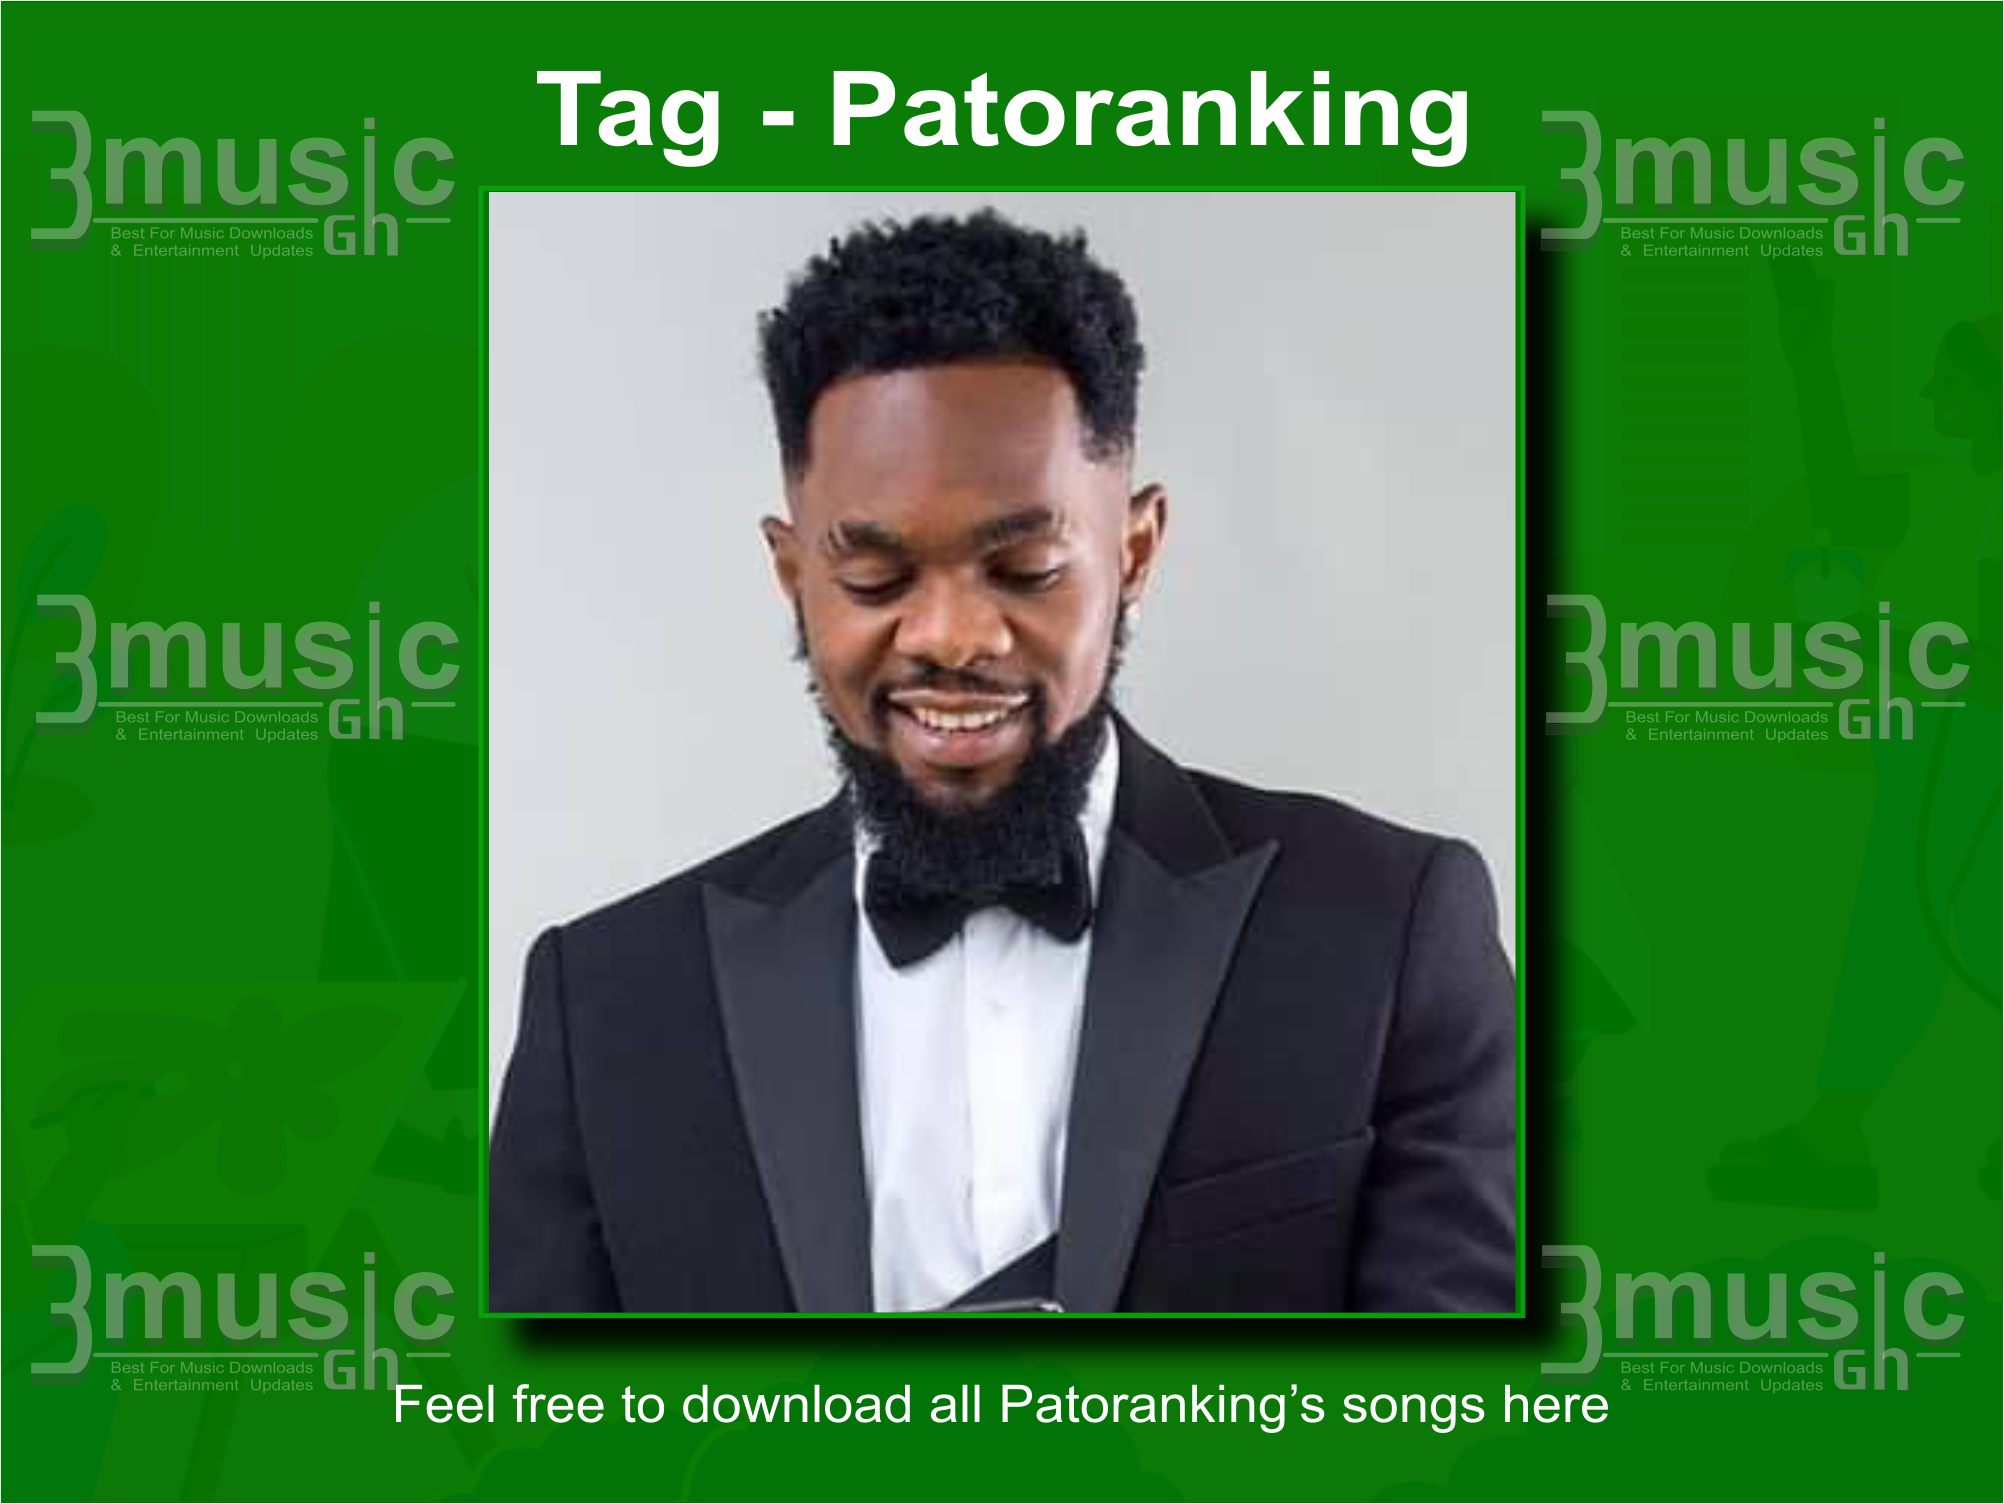 Patoranking songs all download_3musicgh.com